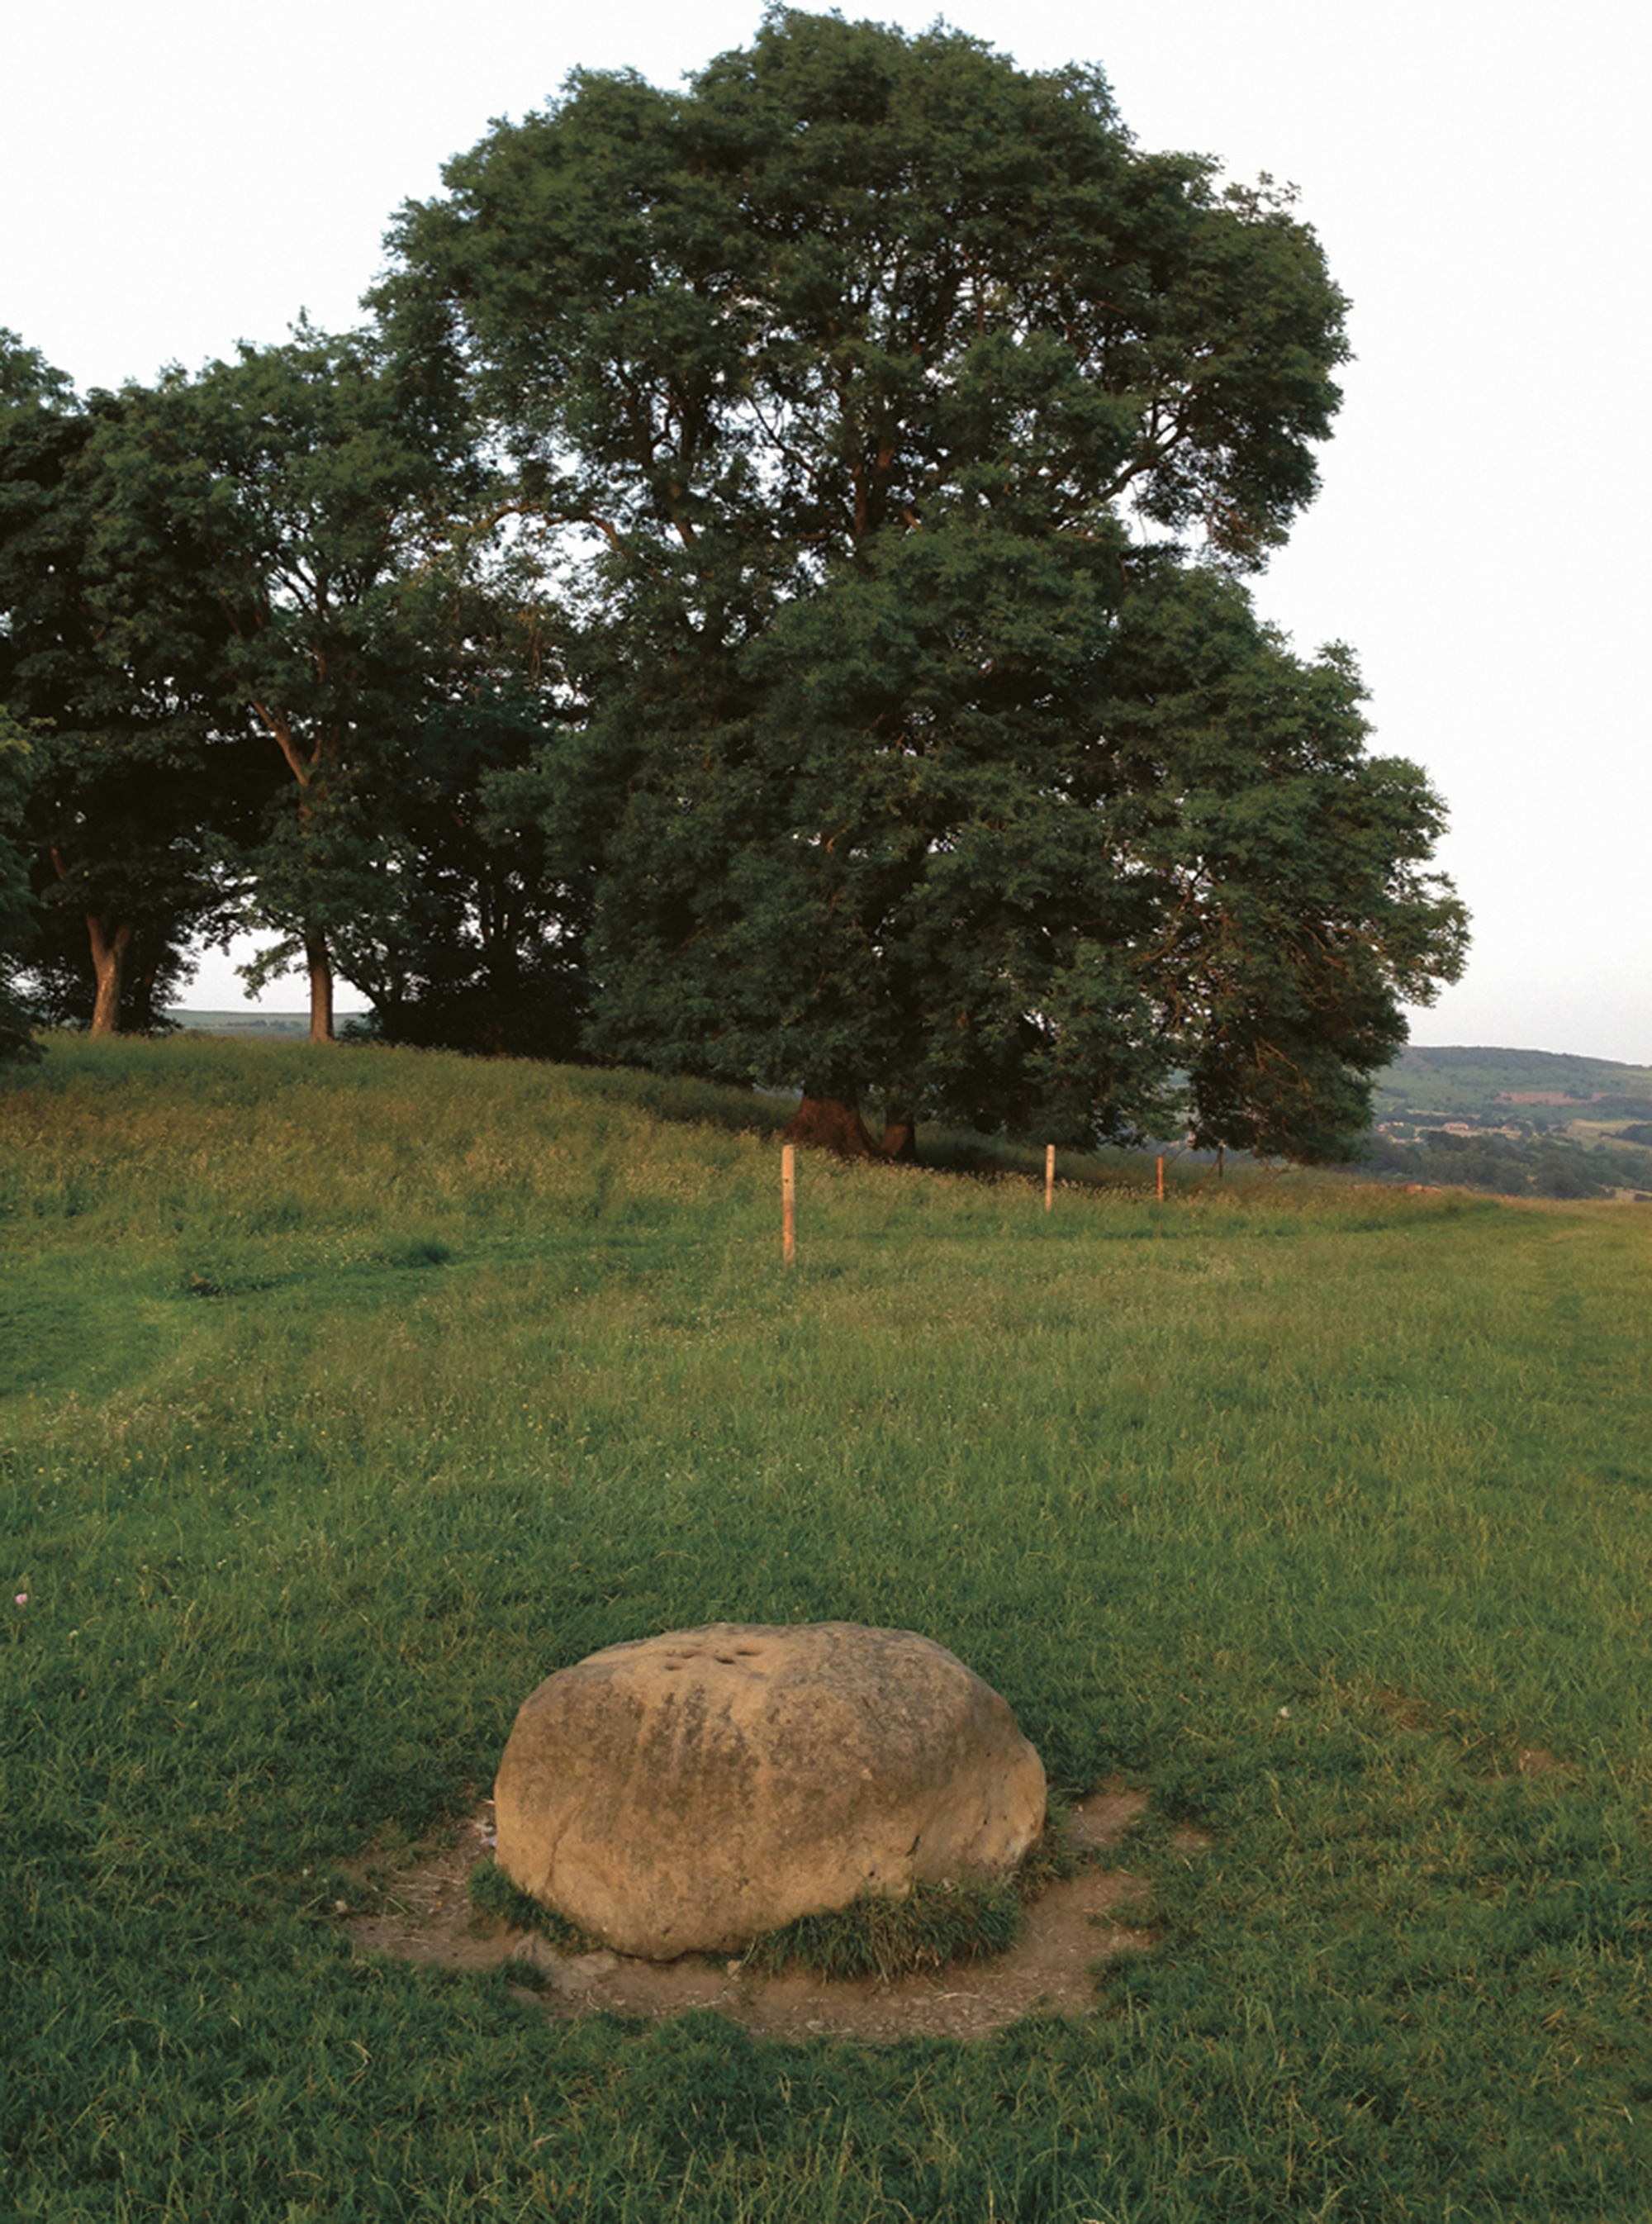 Artist Sophie Nys’s photograph of a plague stone at Eyam, Derbyshire.